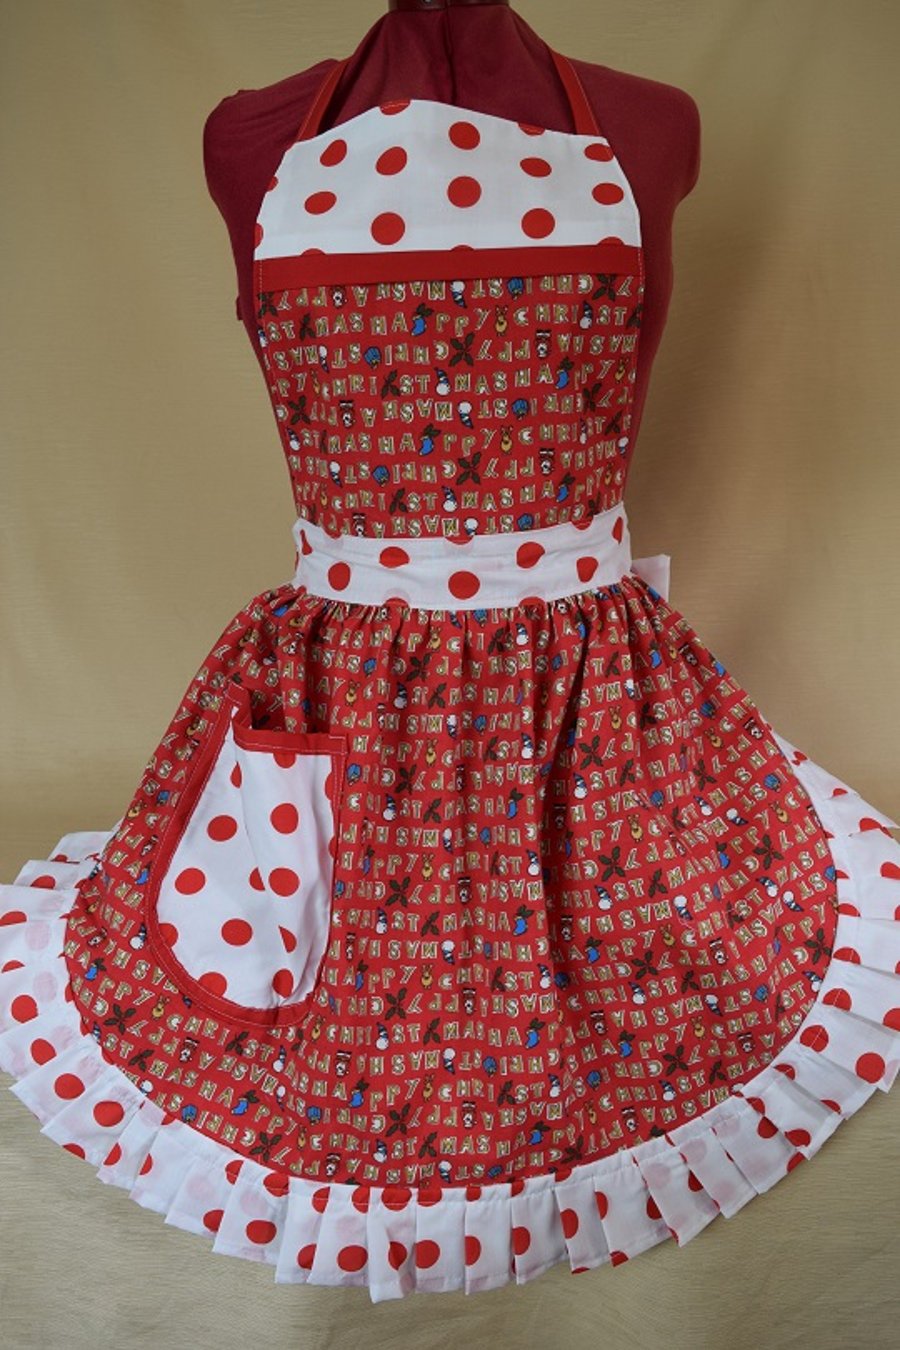 Vintage 50s Style Full Apron Pinny - Happy Christmas with Polka Dot Trim